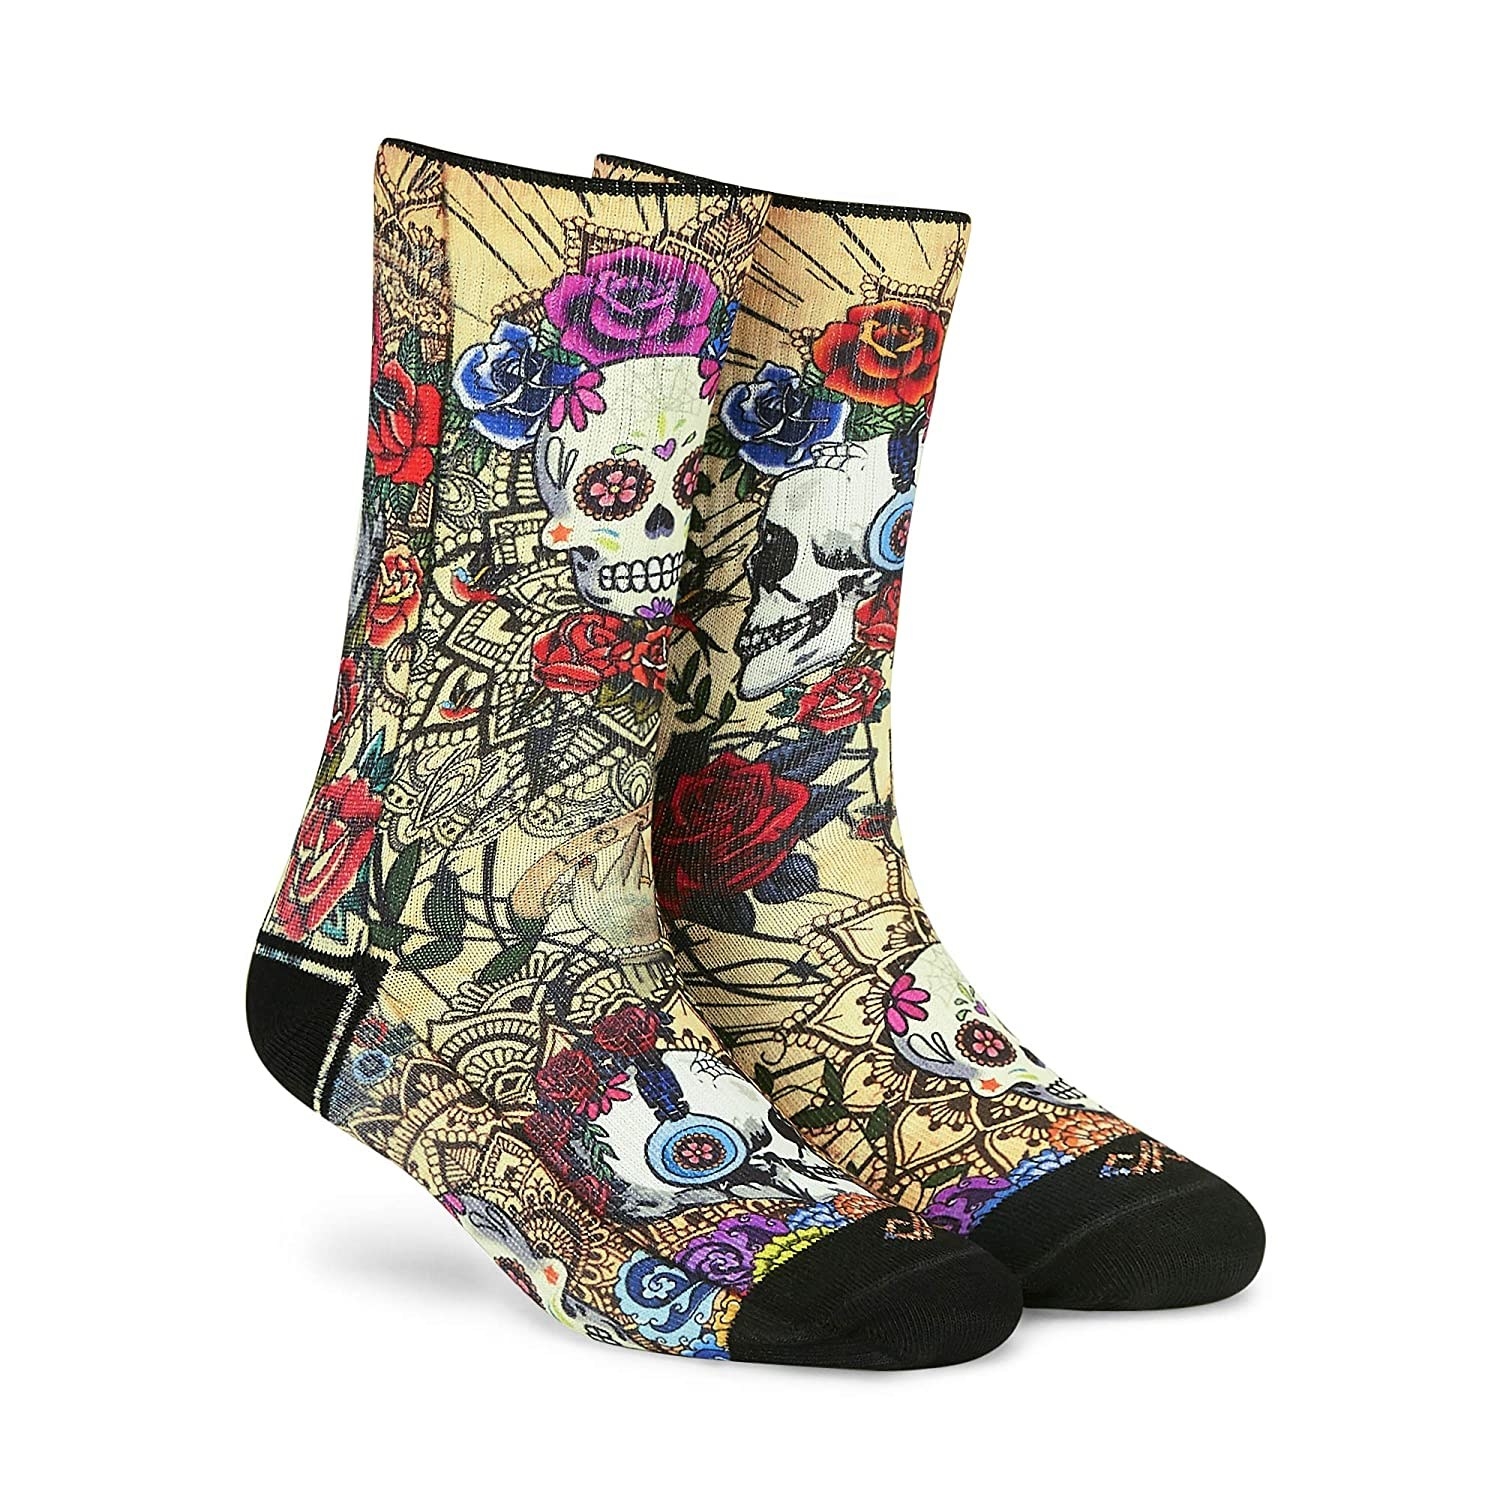 The socks have an abstract print of flowers, mandalas, and skulls